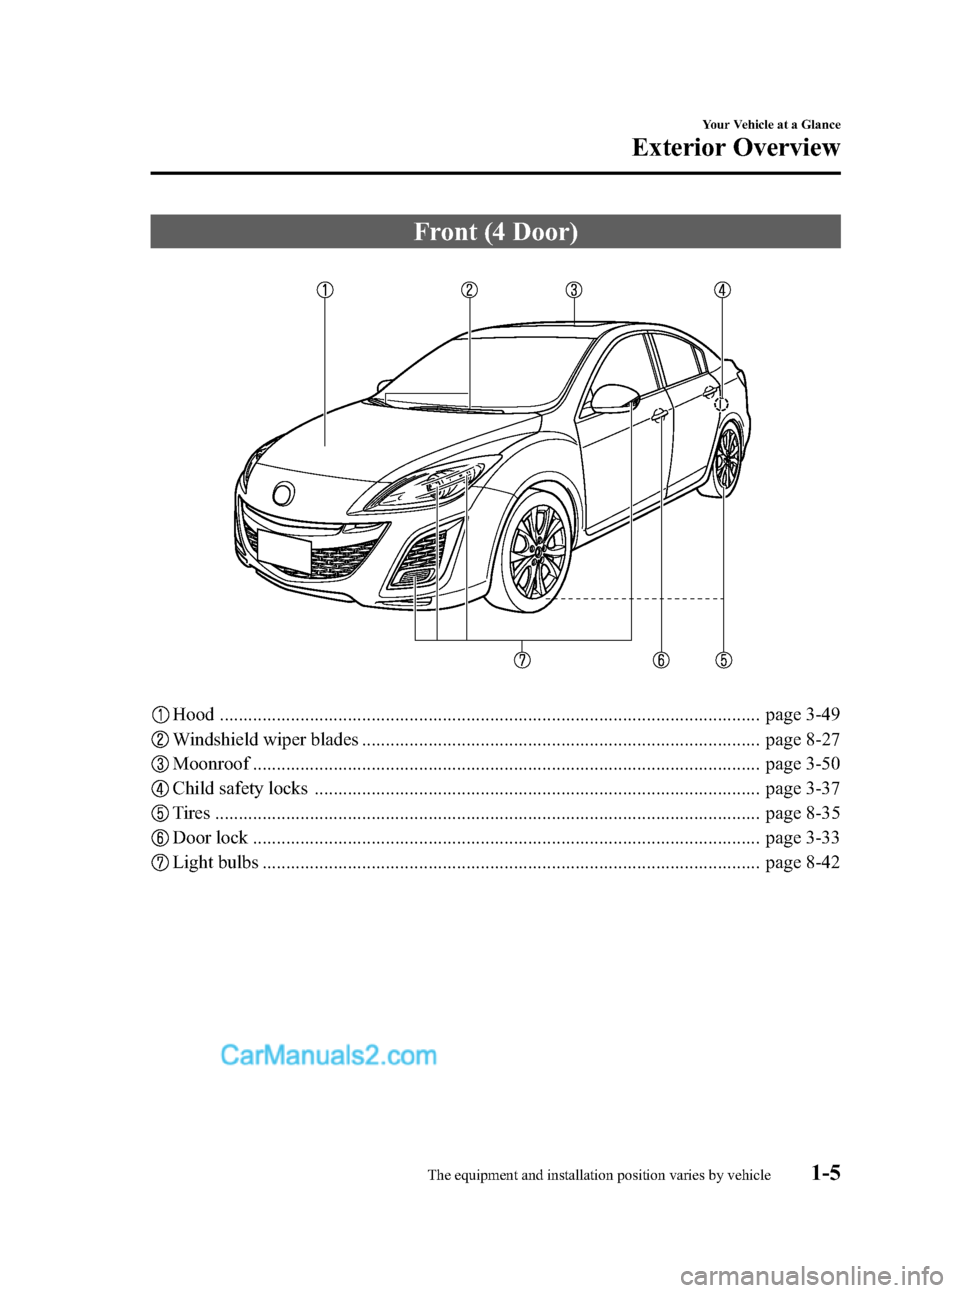 MAZDA MODEL MAZDASPEED 3 2011  Owners Manual (in English) Black plate (11,1)
Front (4 Door)
Hood .................................................................................................................. page 3-49
Windshield wiper blades ............